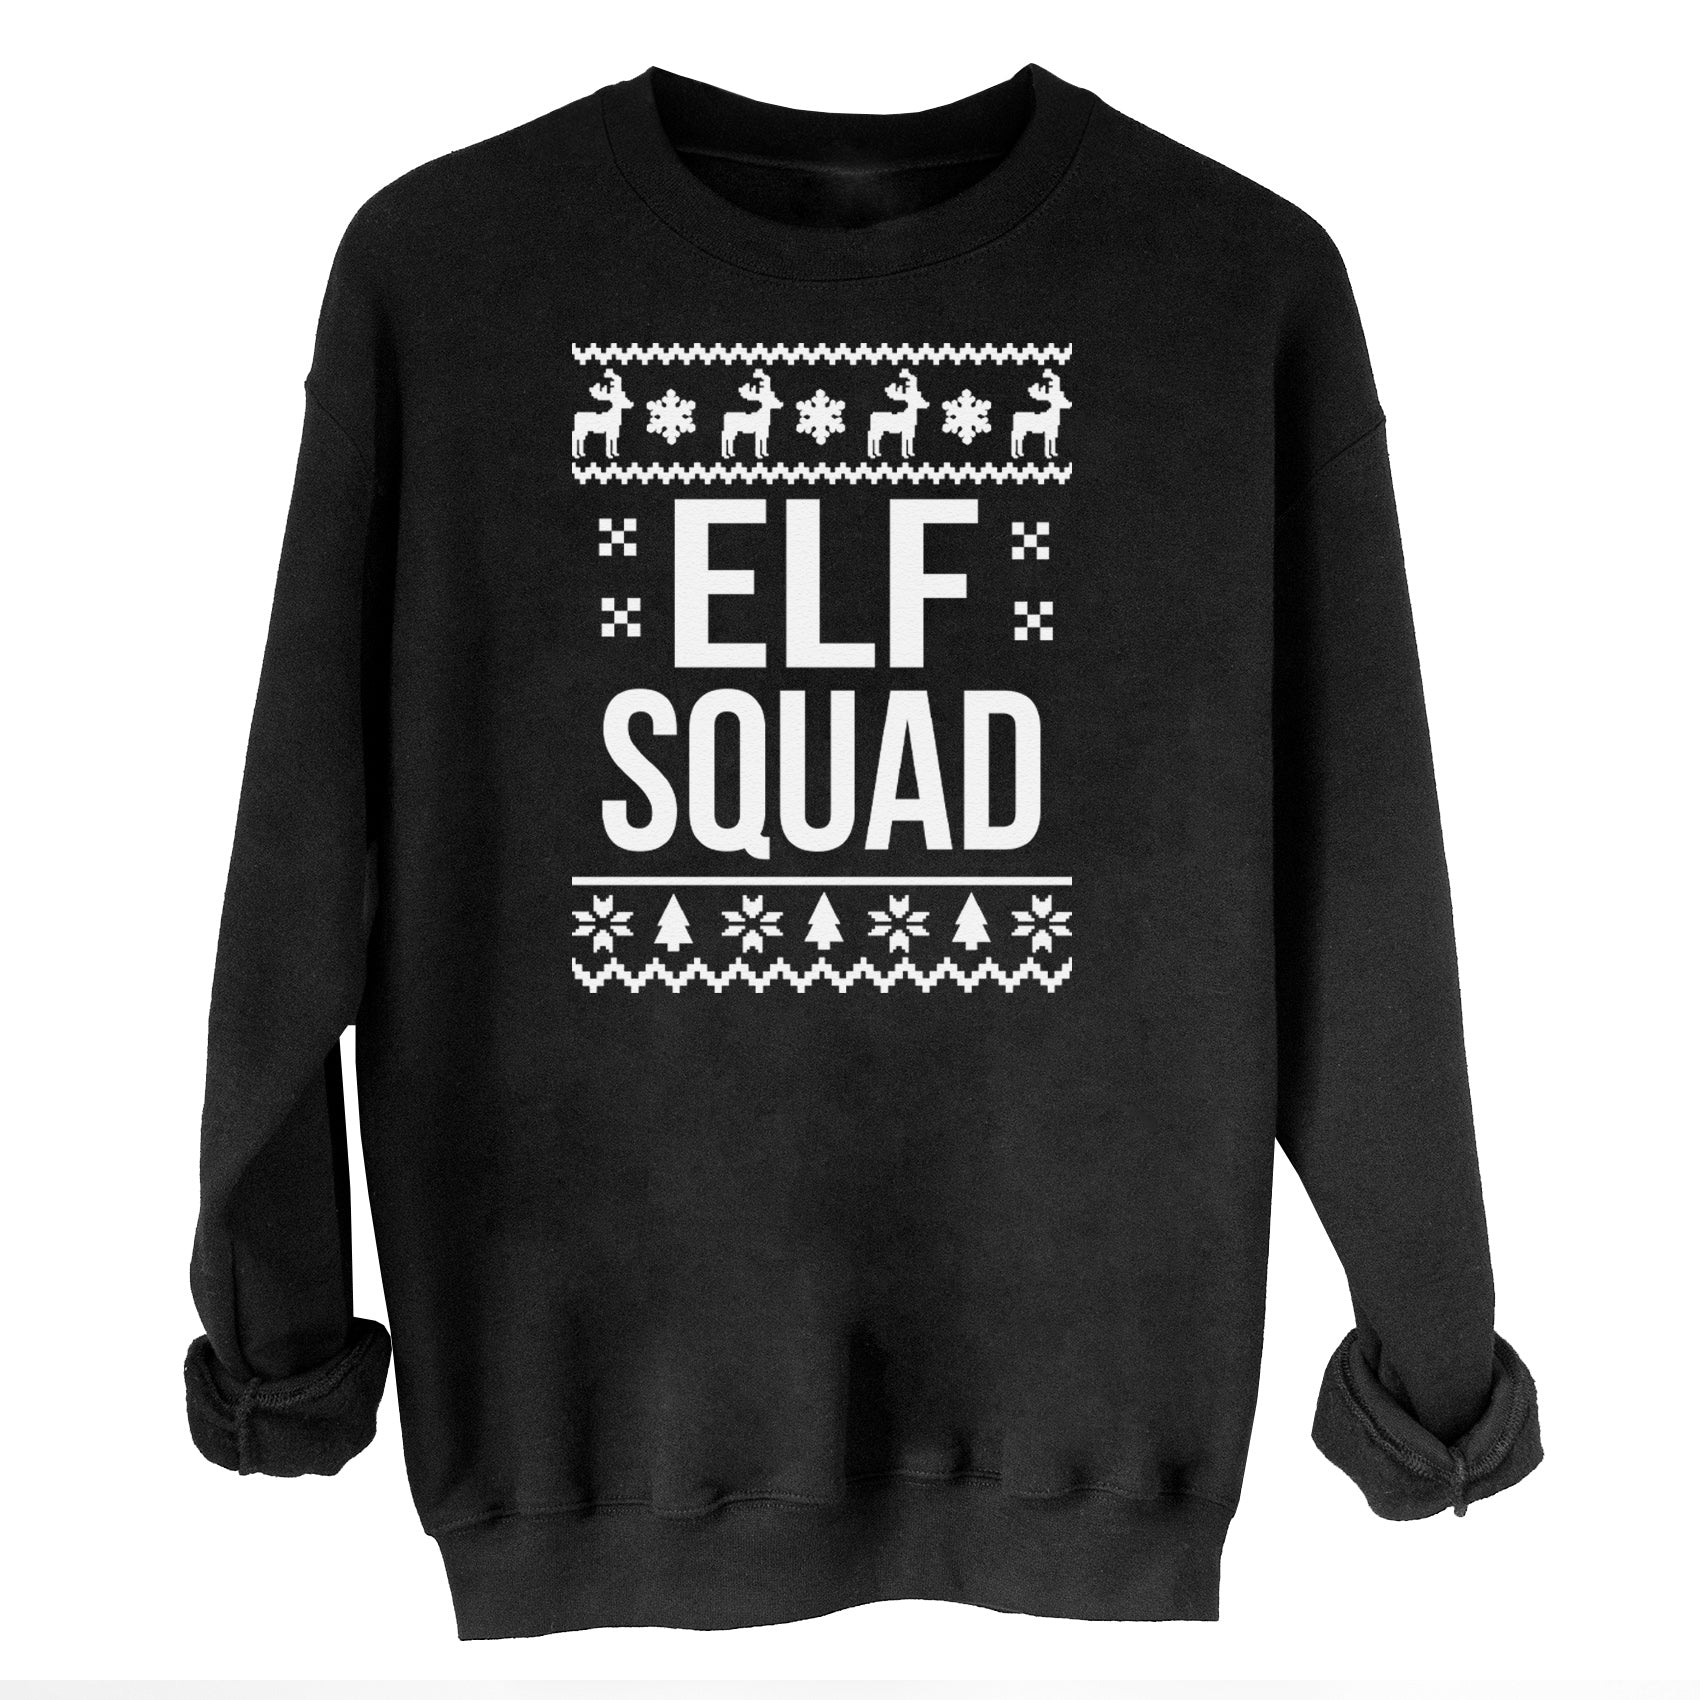 Elf Squad Christmas Sweater - Christmas Jumper Sweatshirt - All Sizes - (Sold Separately)